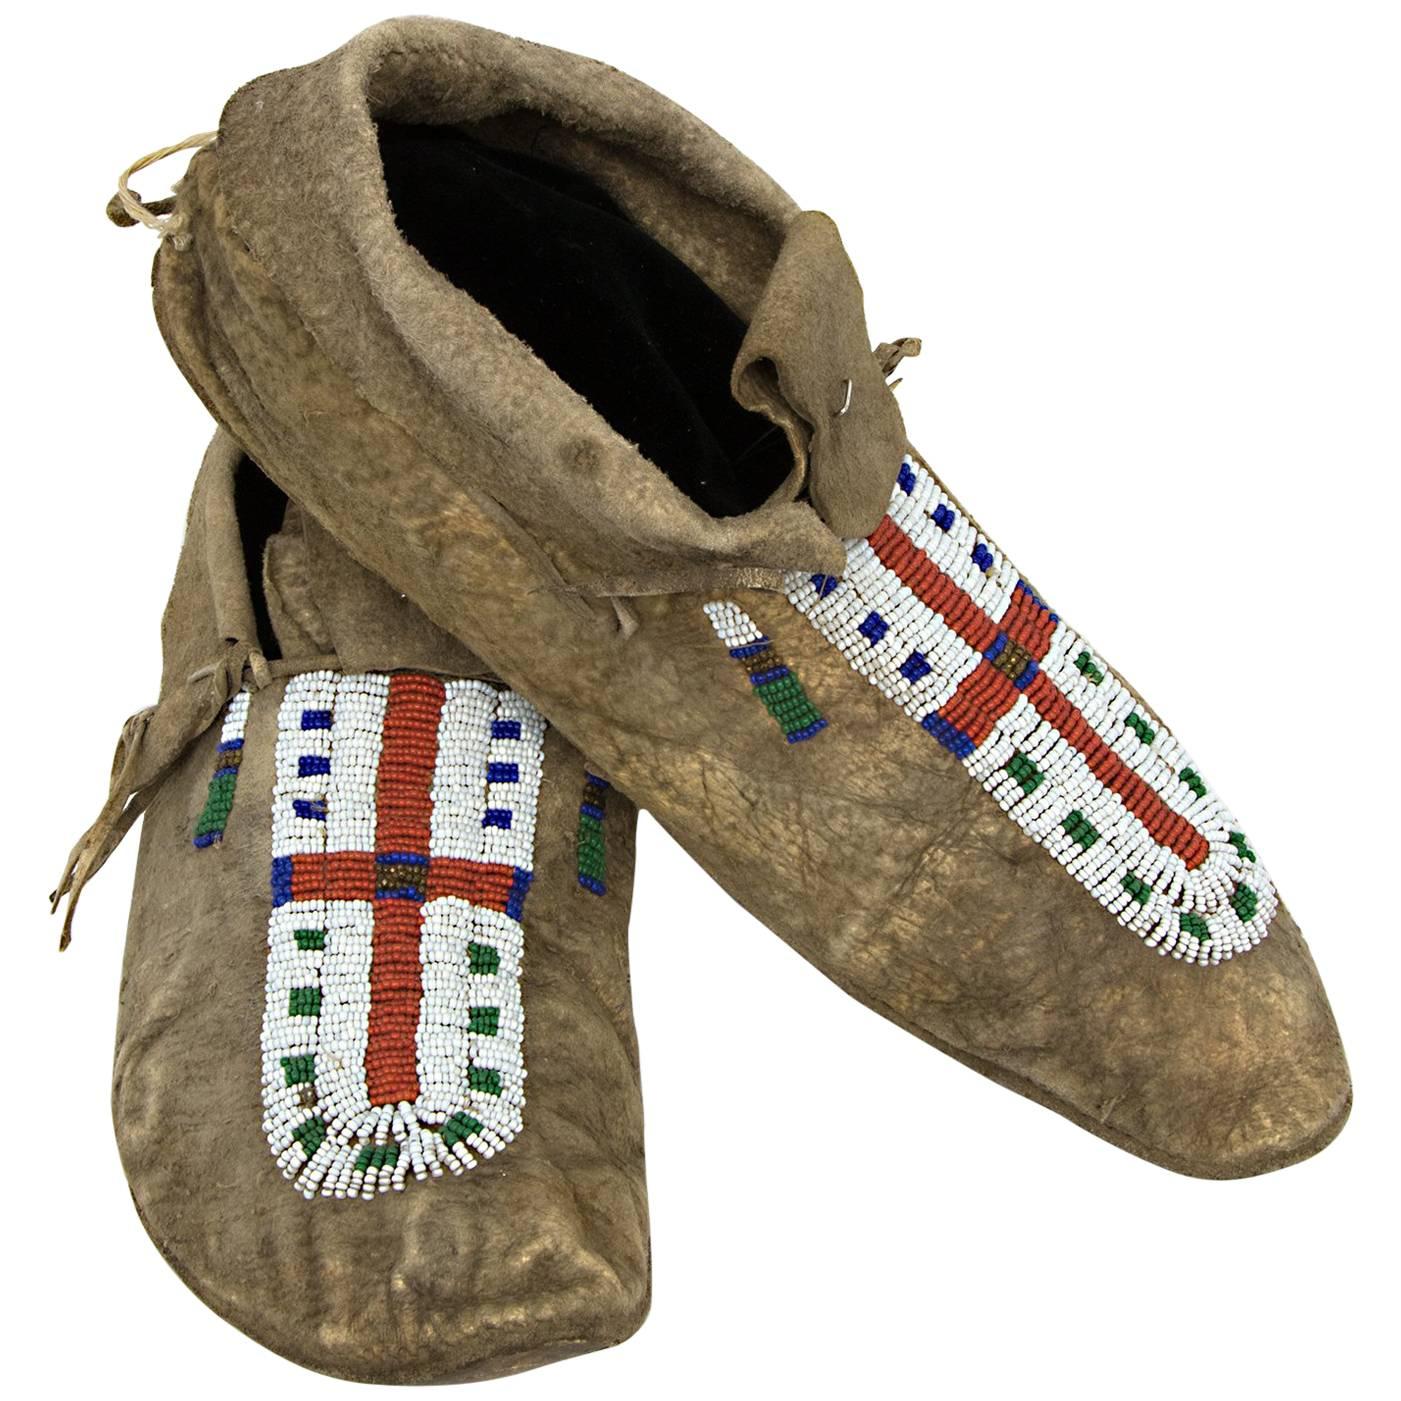 Antique Native American Beaded Moccasins, 19th Century, Plains